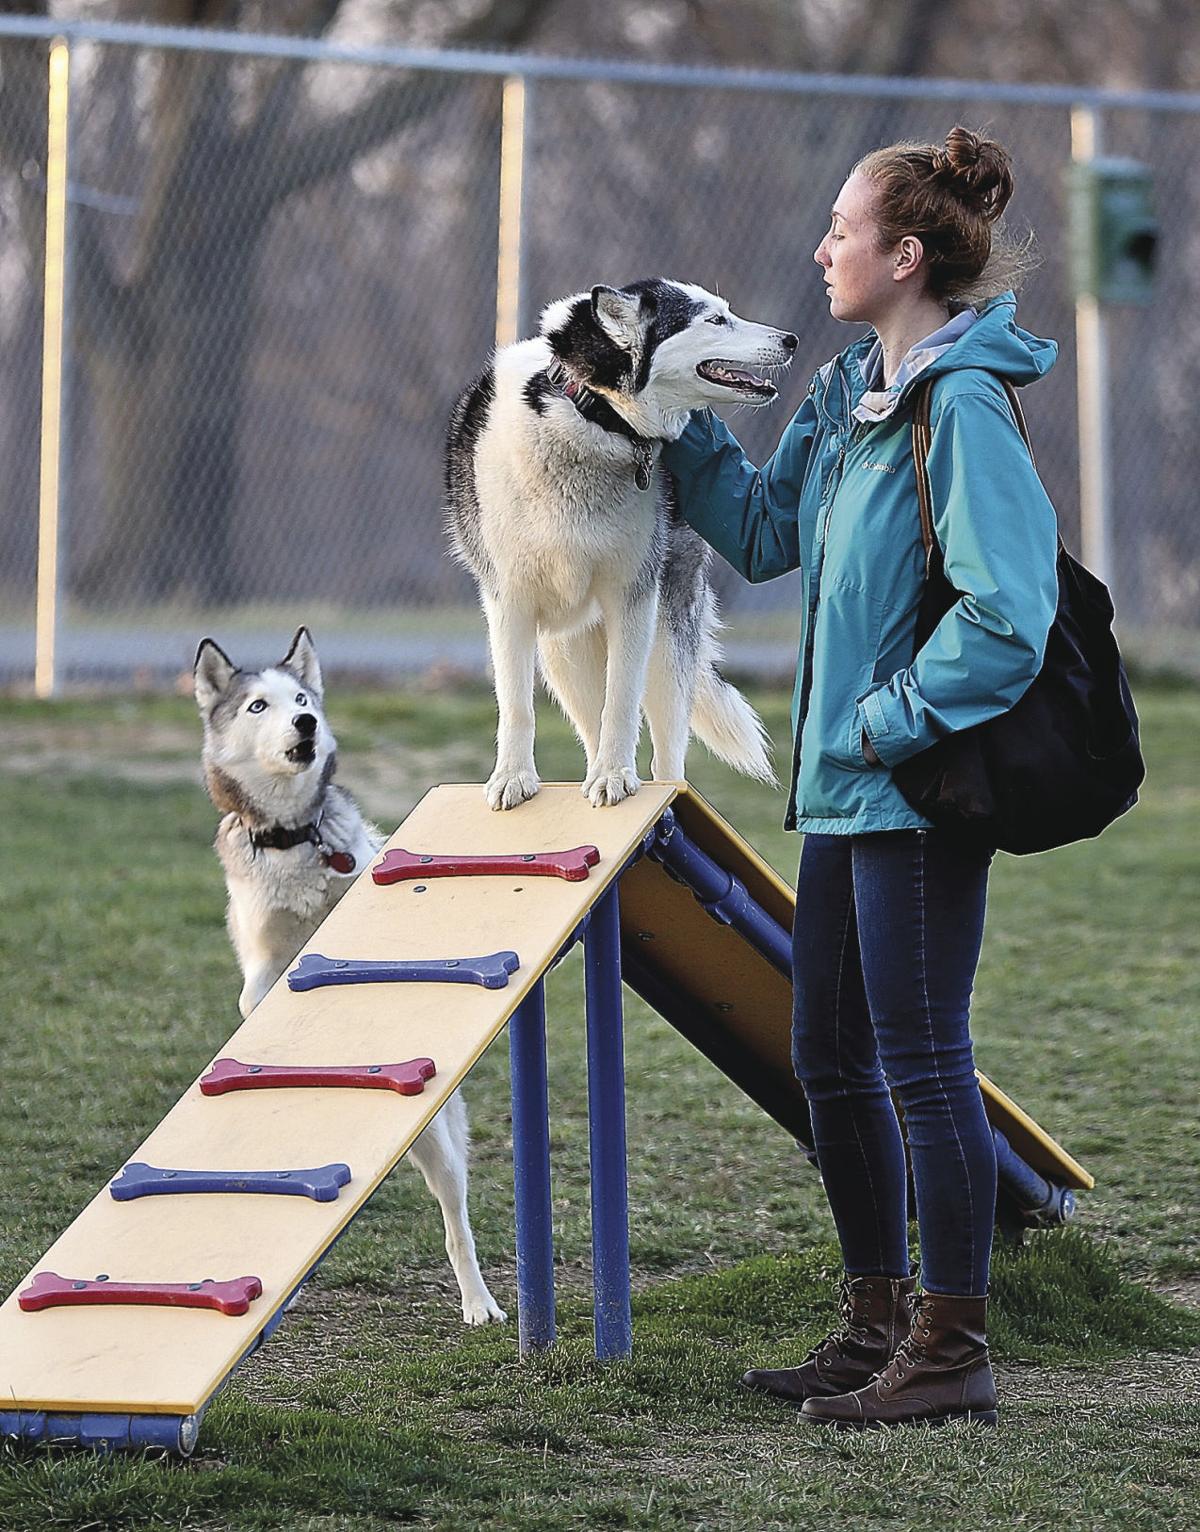 City dog park a thrill for dogs and humans | Winchester